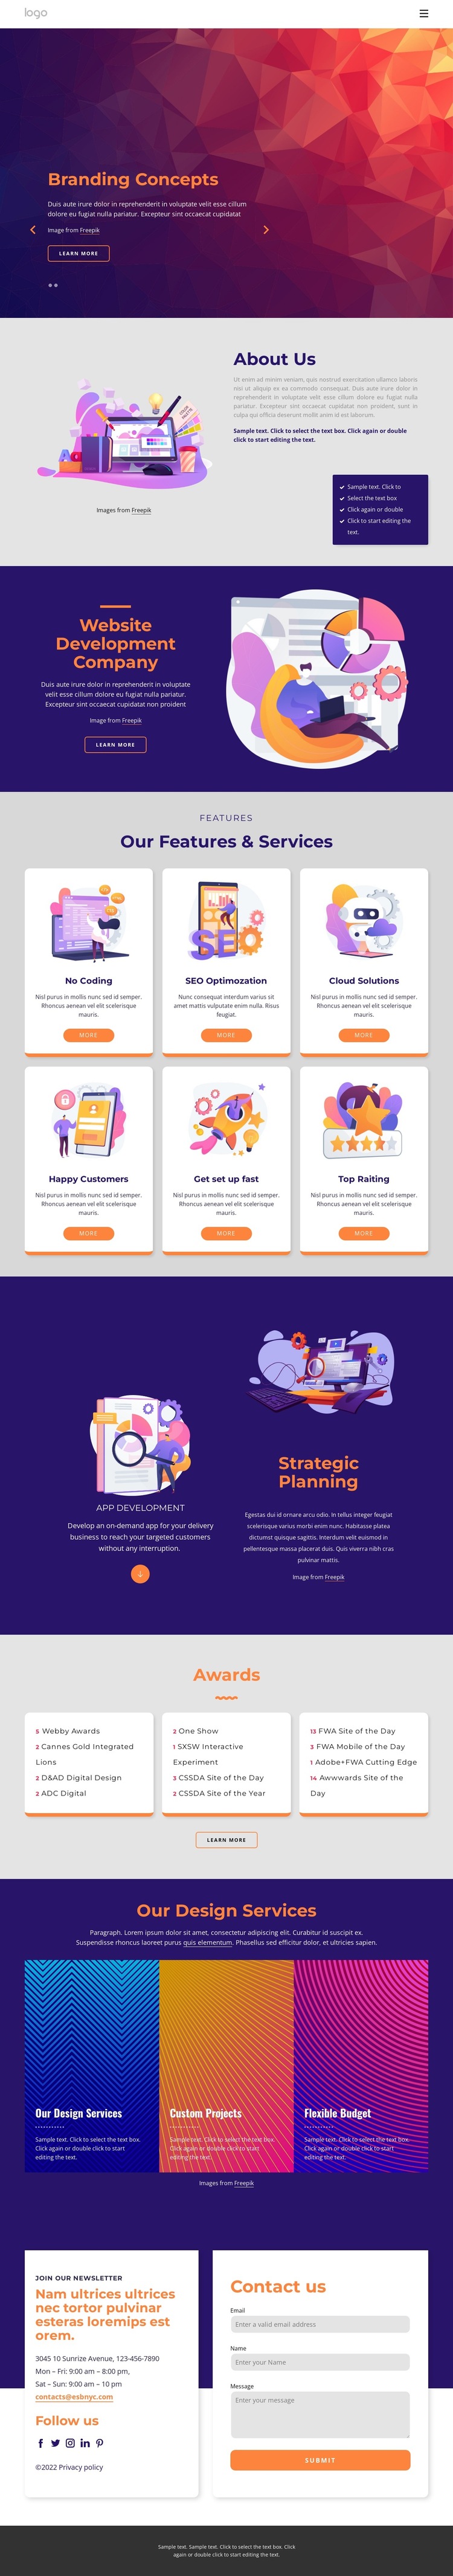 Branding concepts HTML5 Template